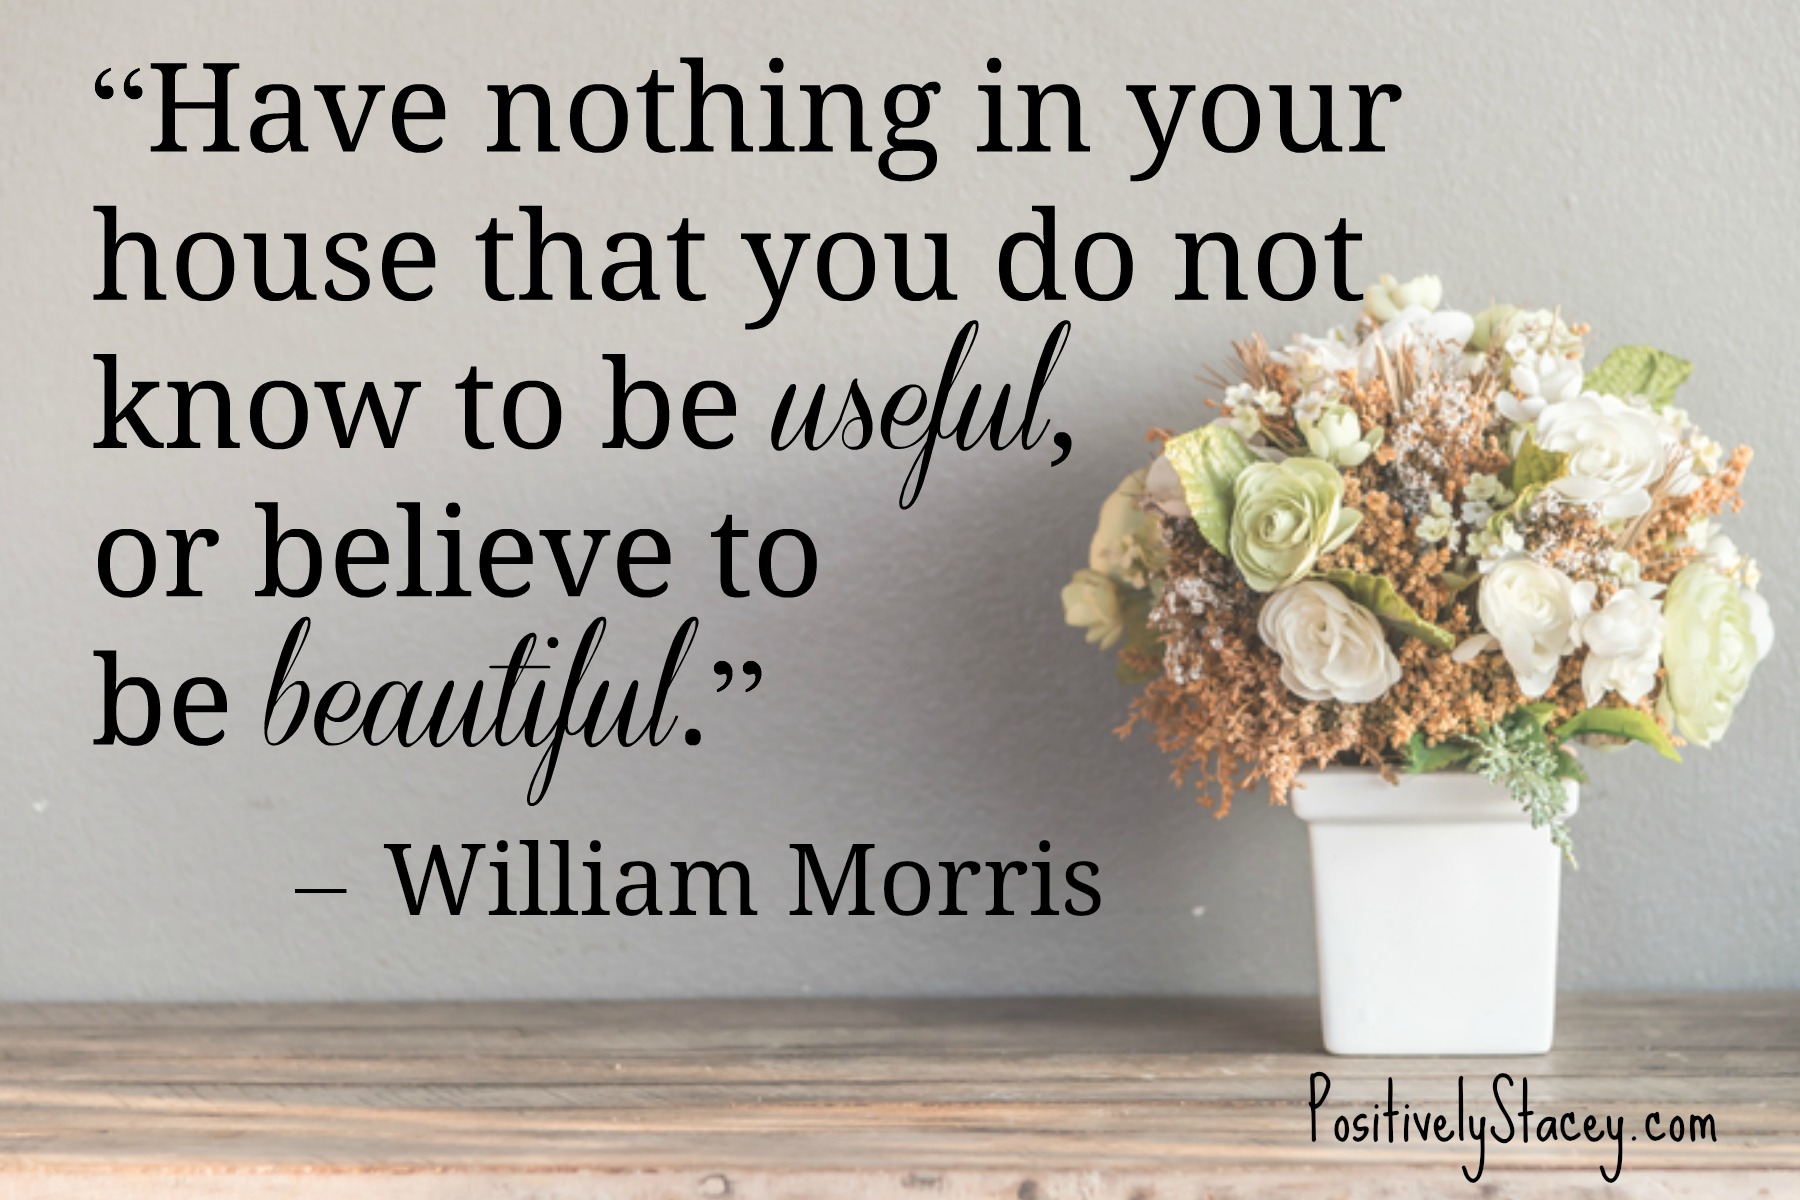 “Have nothing in your house that you do not know to be useful, or believe to be beautiful.” – William Morris